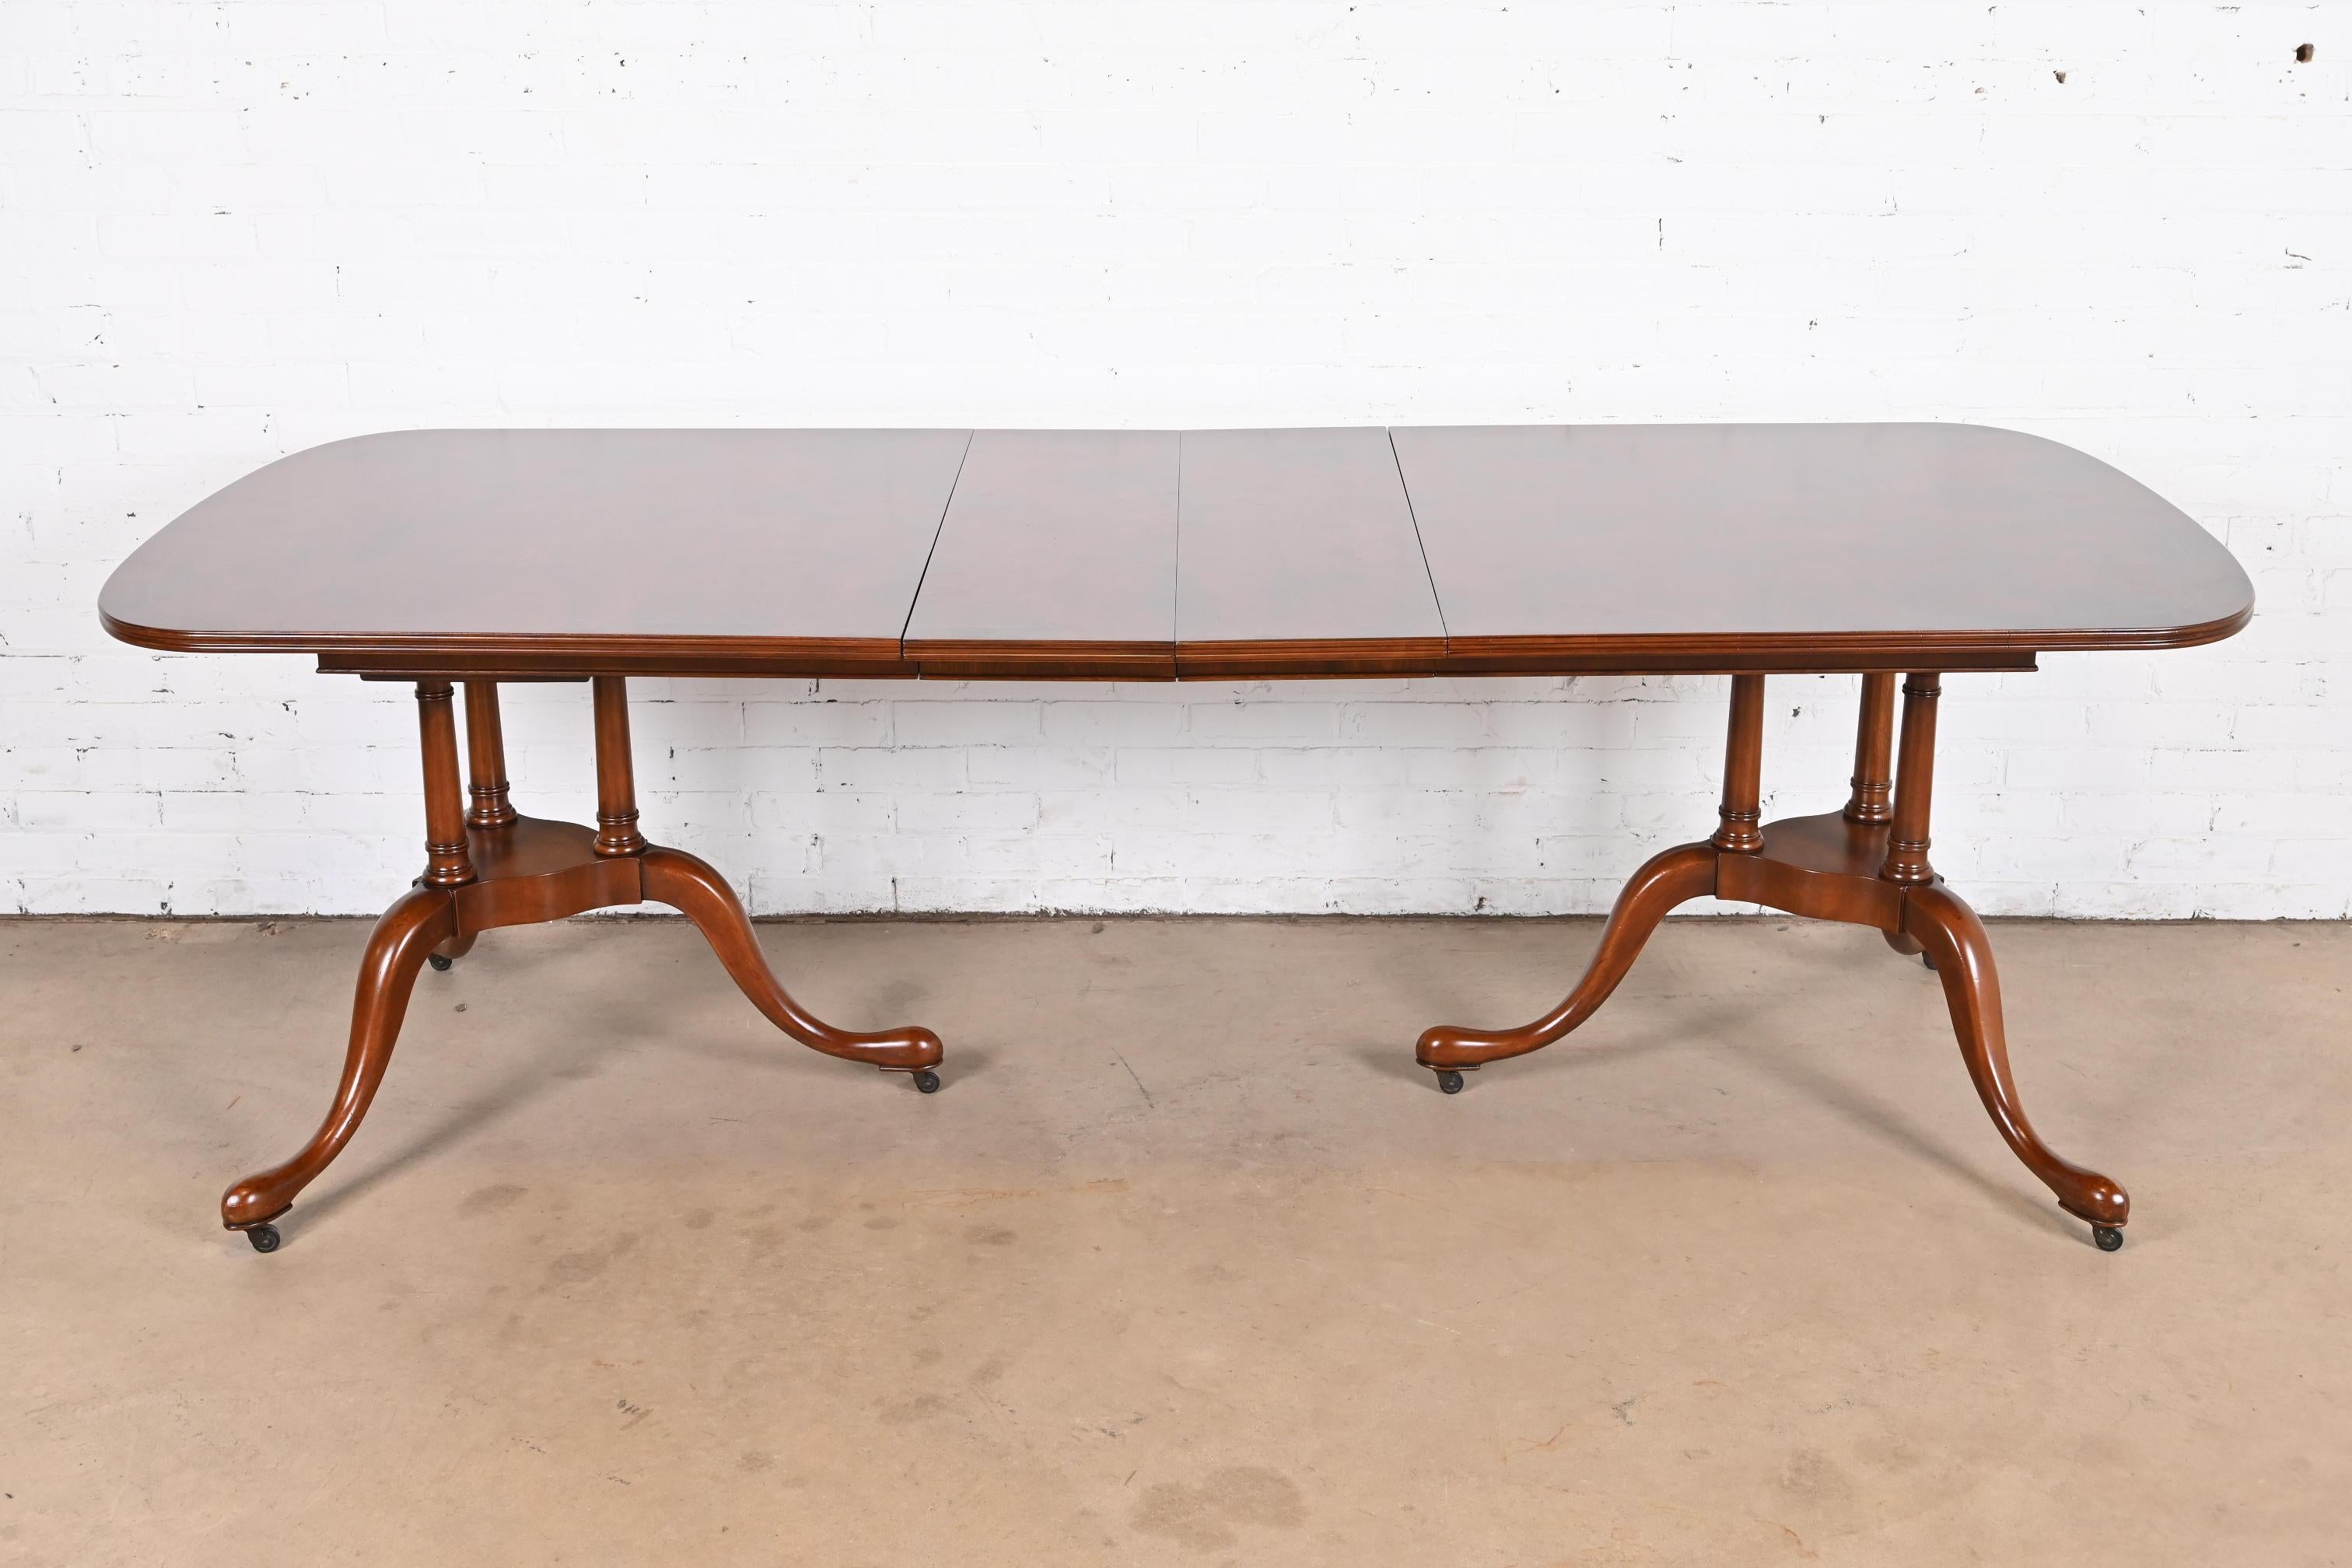 Georgian Mahogany and Burlwood Double Pedestal Dining Table by Irwin, Refinished For Sale 2